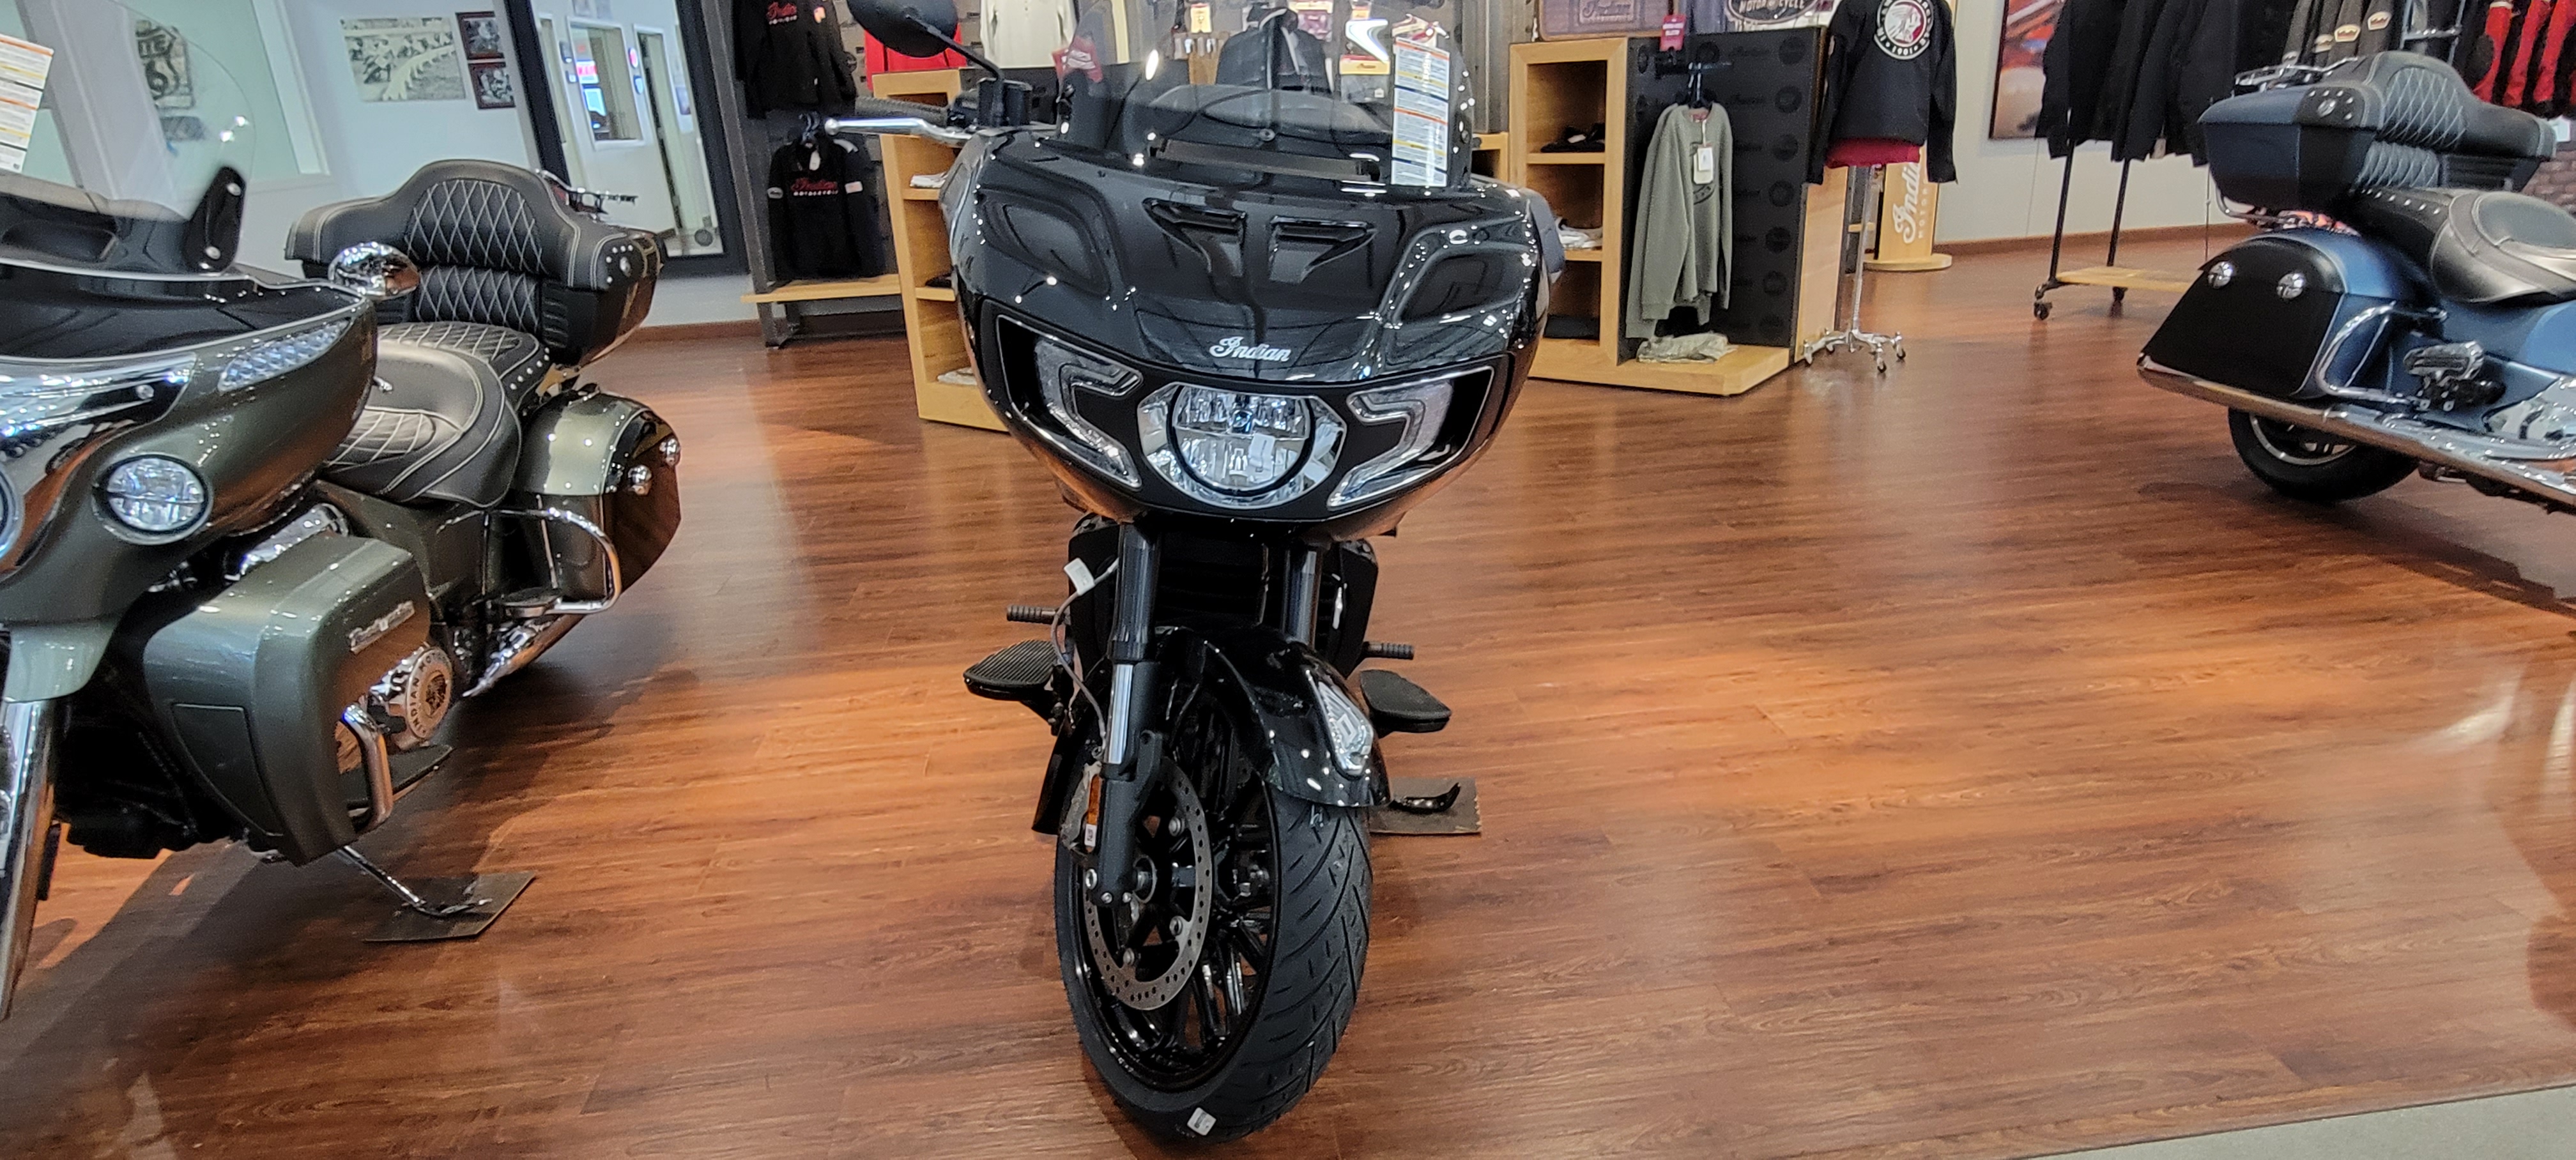 2021 Indian Motorcycle Challenger at Brenny's Motorcycle Clinic, Bettendorf, IA 52722